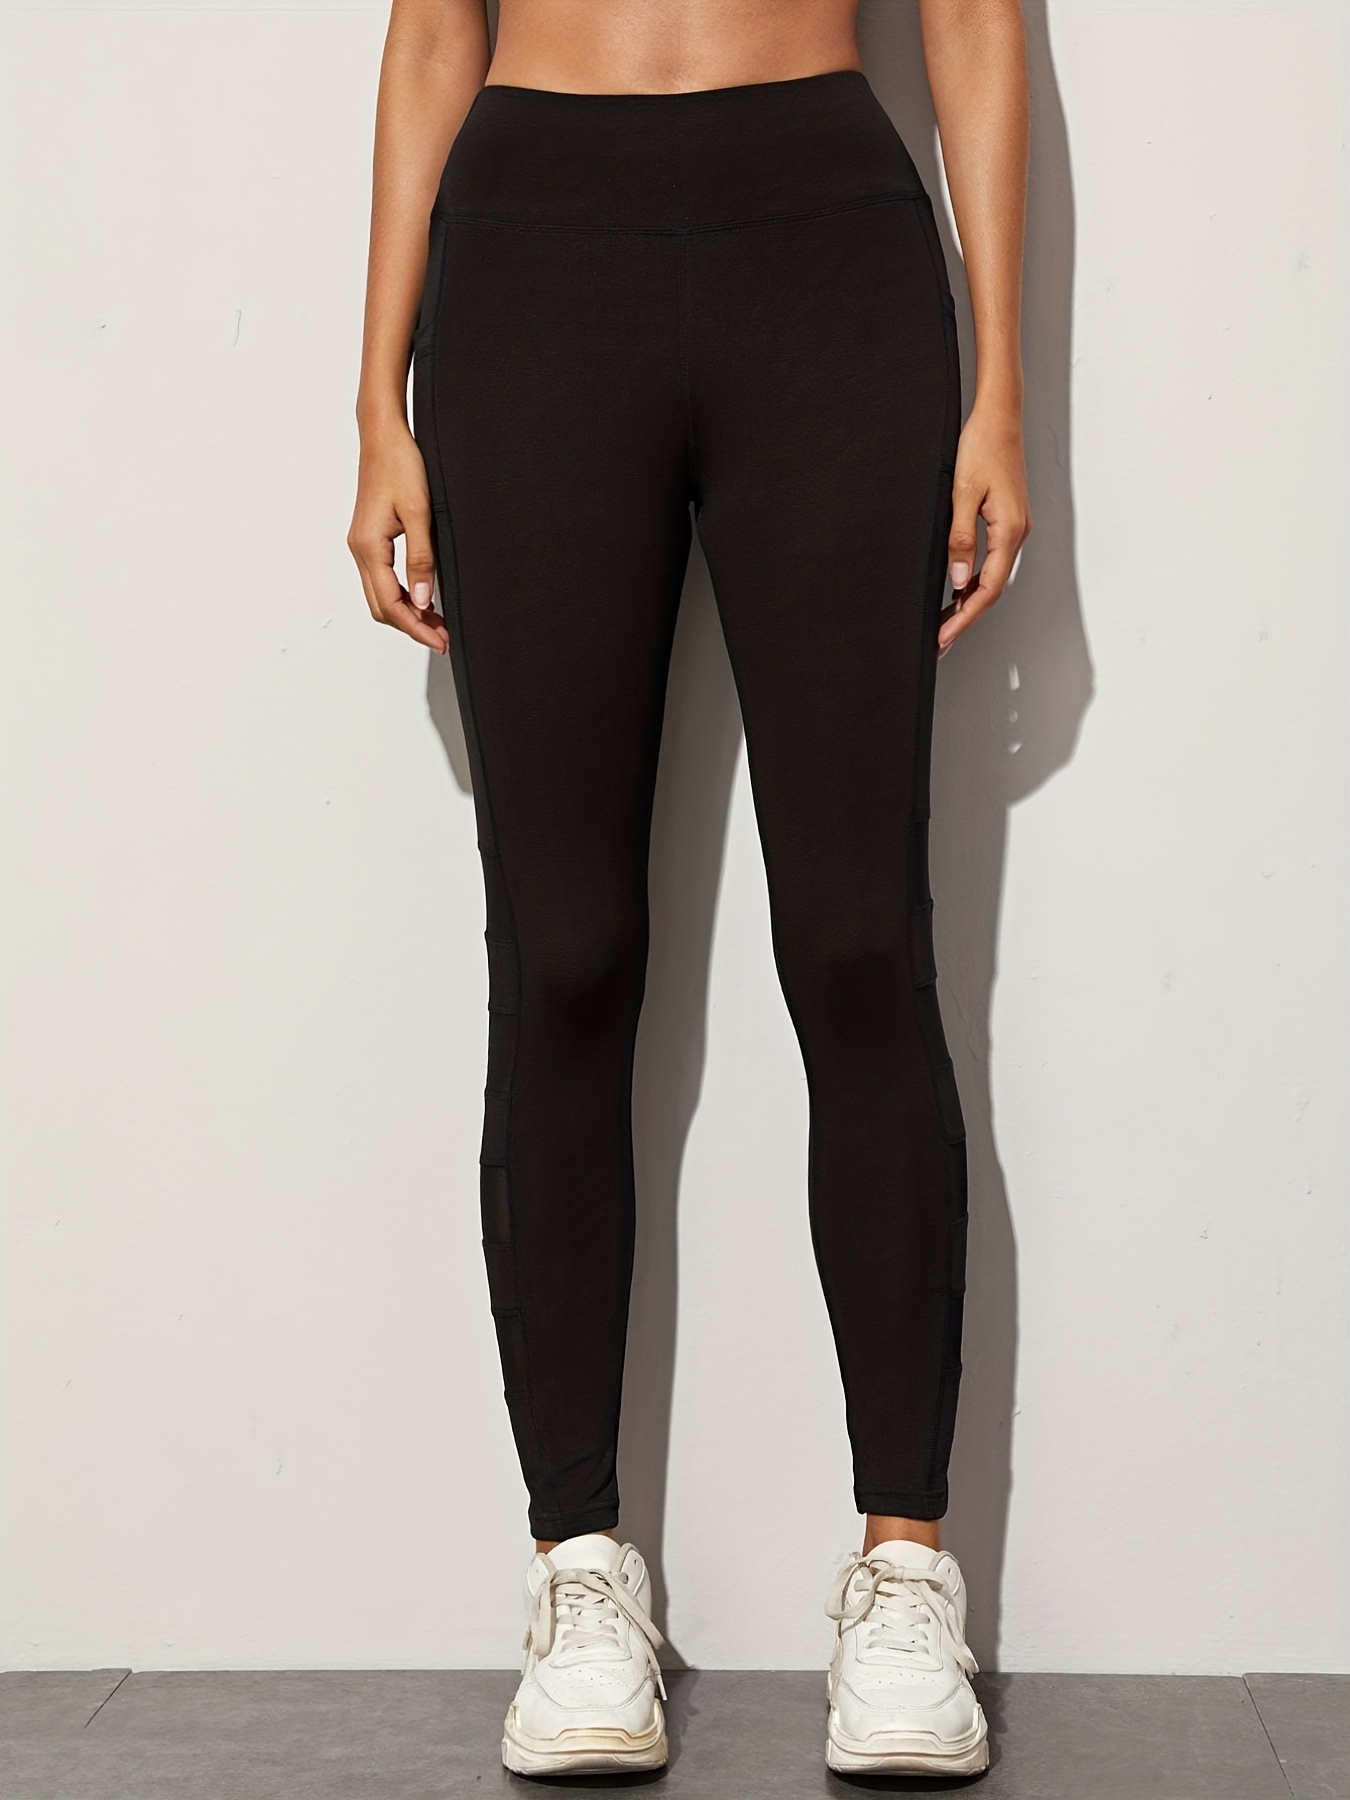 Stretch cotton leggings with pockets for women